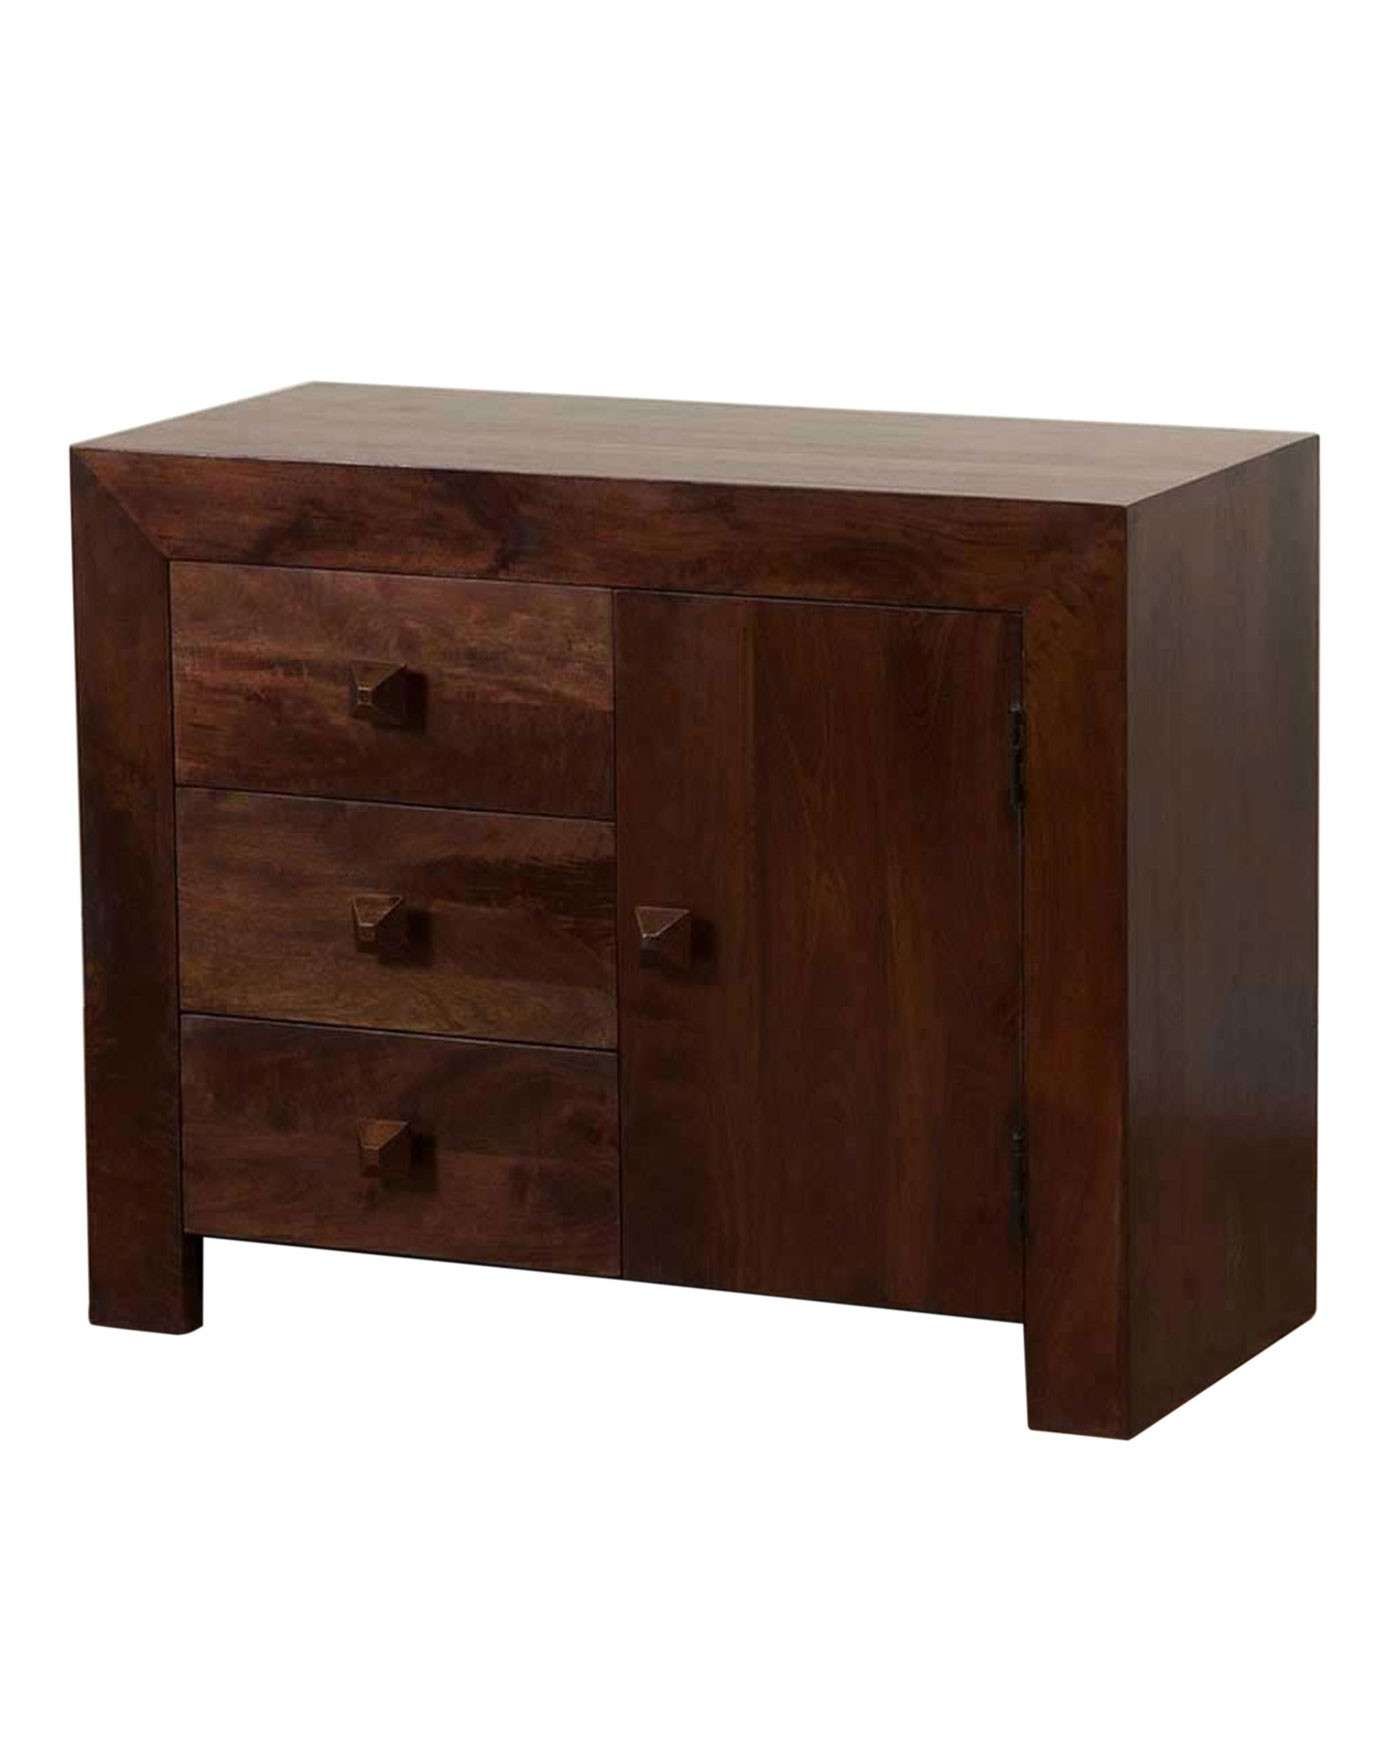 Dakota Small Sideboard With 3 Drawers Dark Shade – Homescapes With Regard To Dark Wood Sideboards (View 10 of 20)